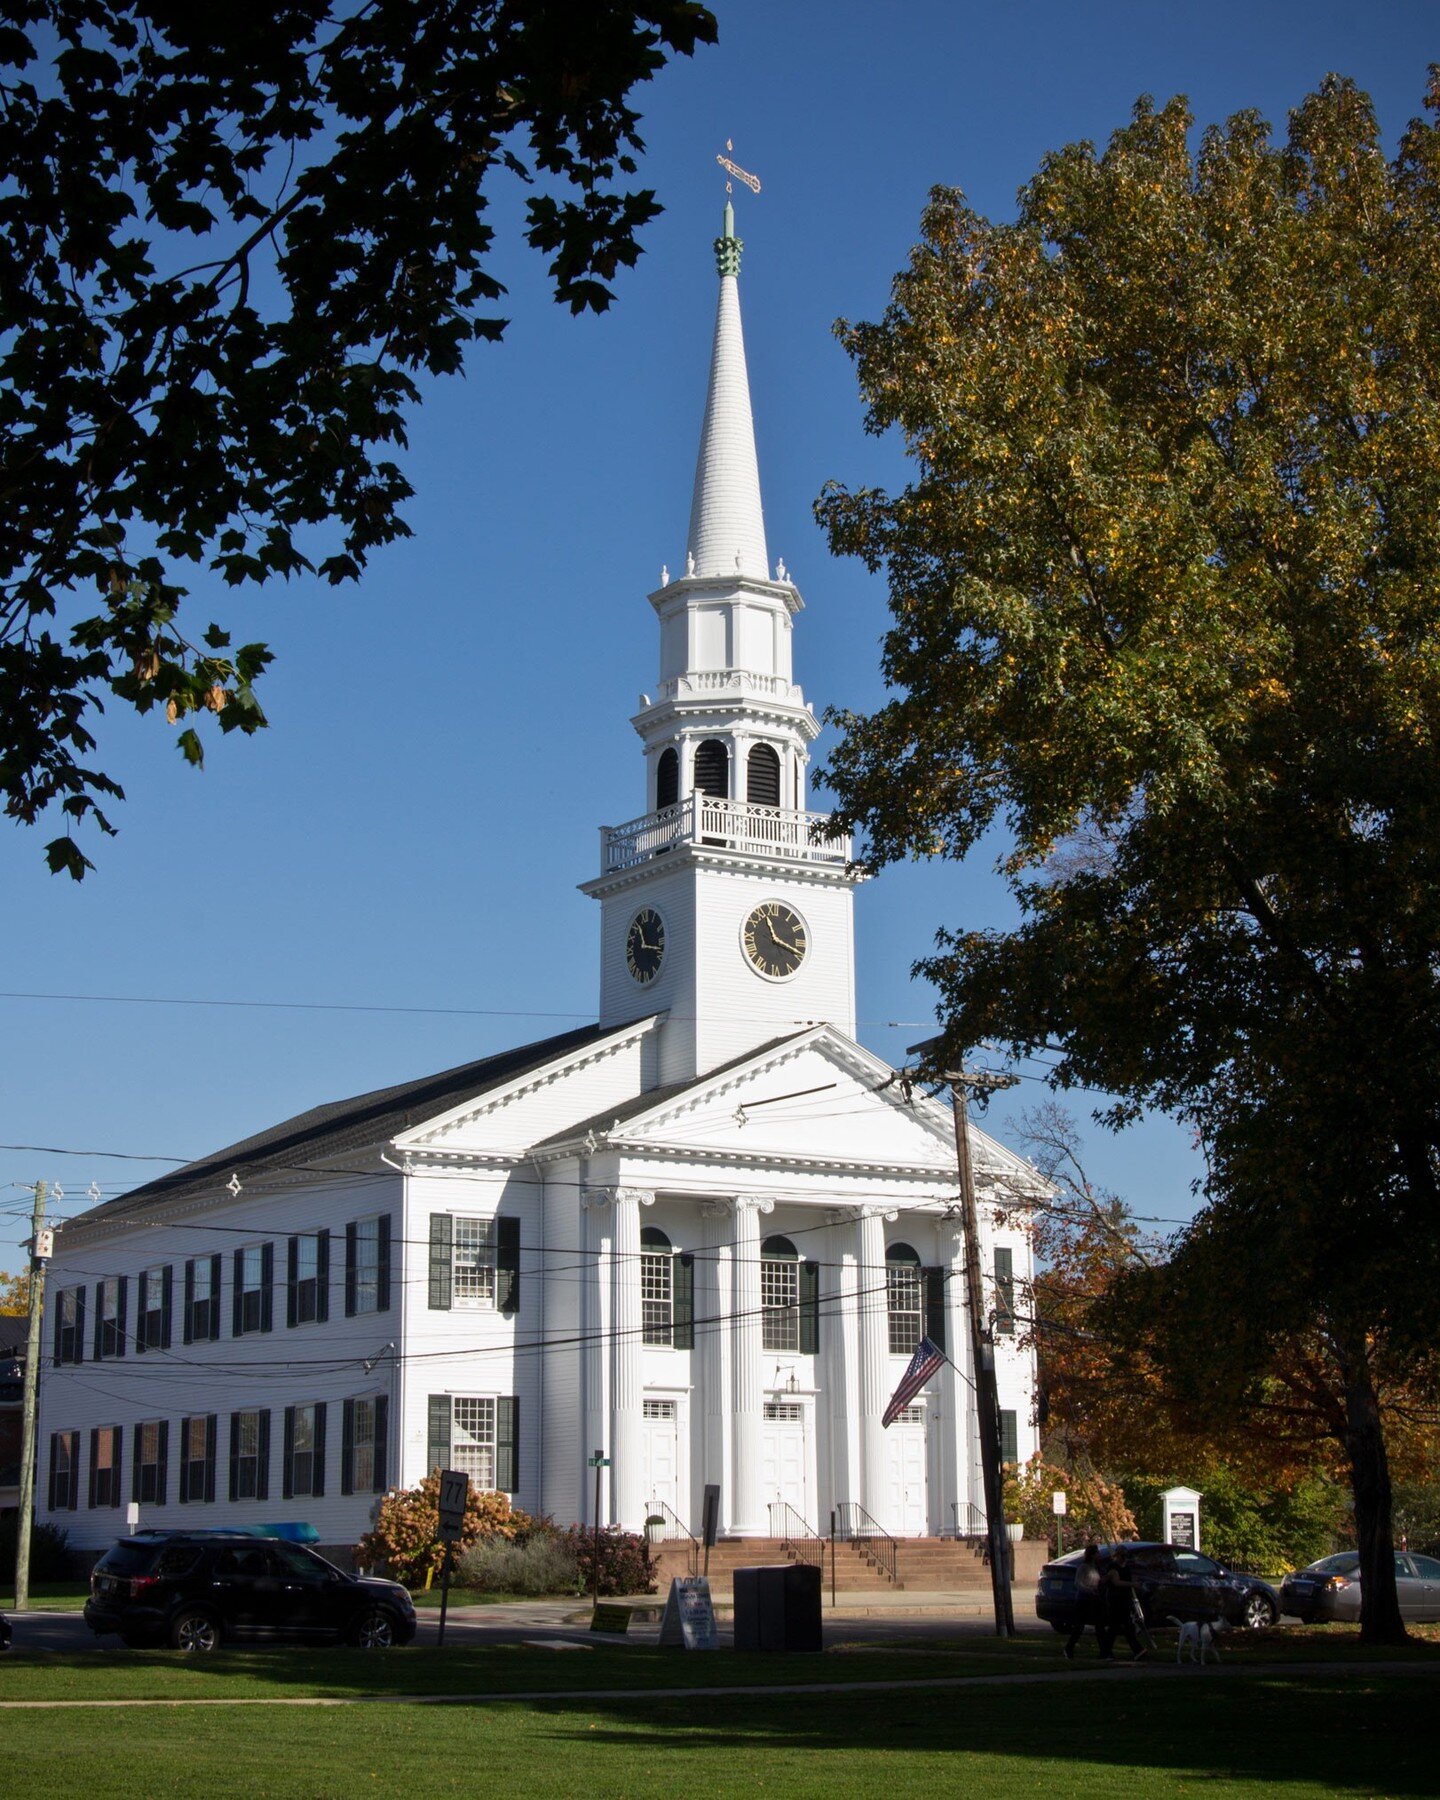 I found out from a reader that next year's Gilmore Girls fan fest is going to take place in Guilford, CT, one of the small &quot;Stars Hollow&quot; towns I stopped at on my last road trip through Connecticut! ☕

This cute town has a white steeple chu